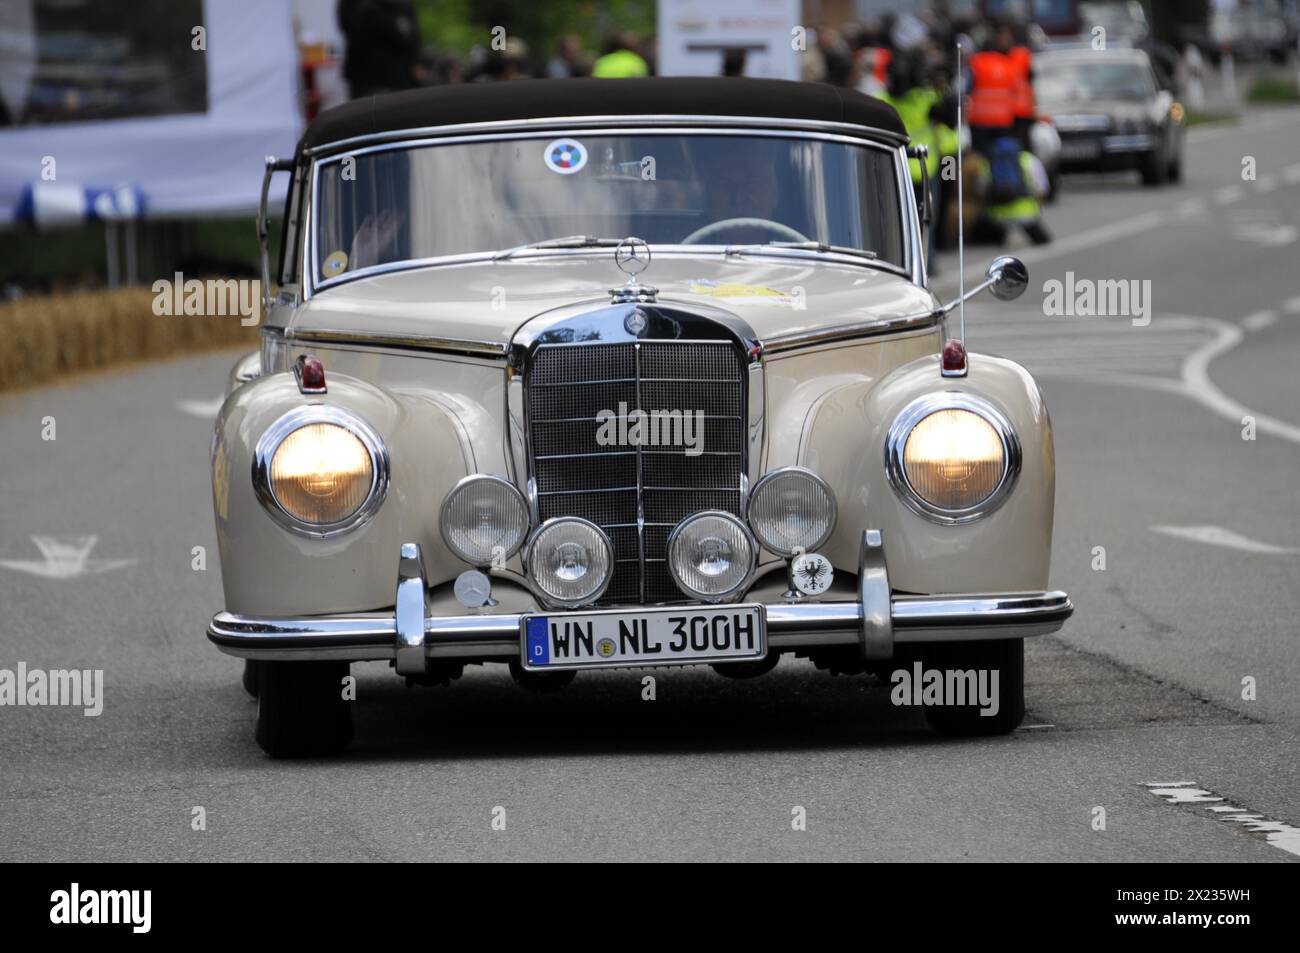 A white Mercedes-Benz classic car drives on a road during a rally, SOLITUDE REVIVAL 2011, Stuttgart, Baden-Wuerttemberg, Germany Stock Photo